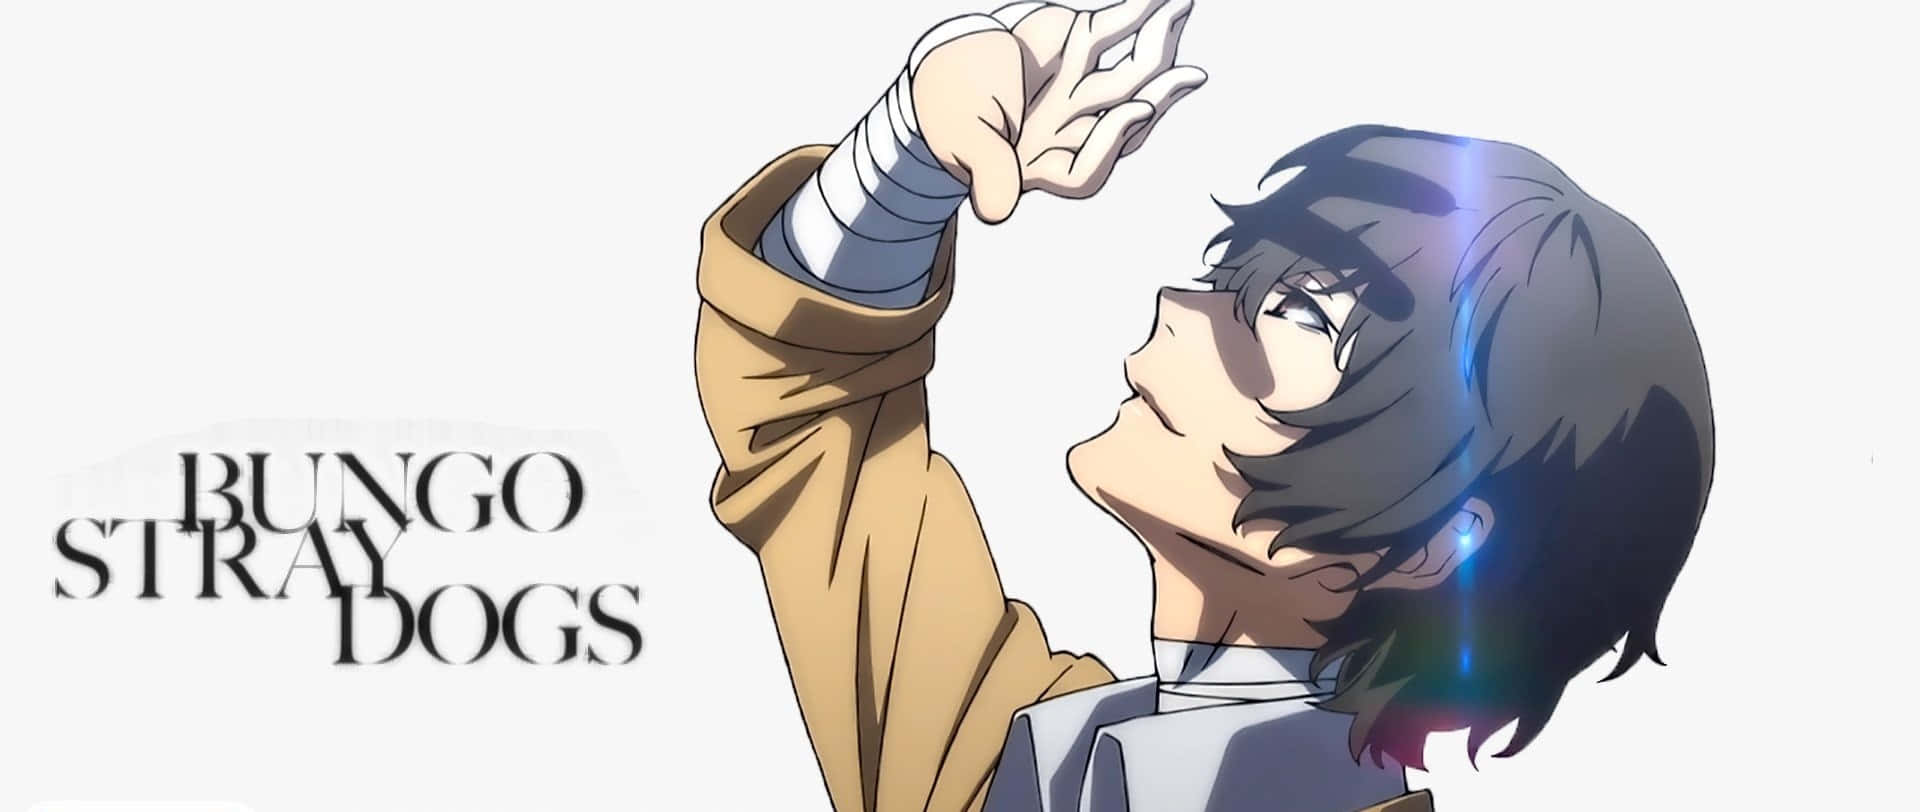 Get into the World of Bungo Stray Dogs with this Stunning Background